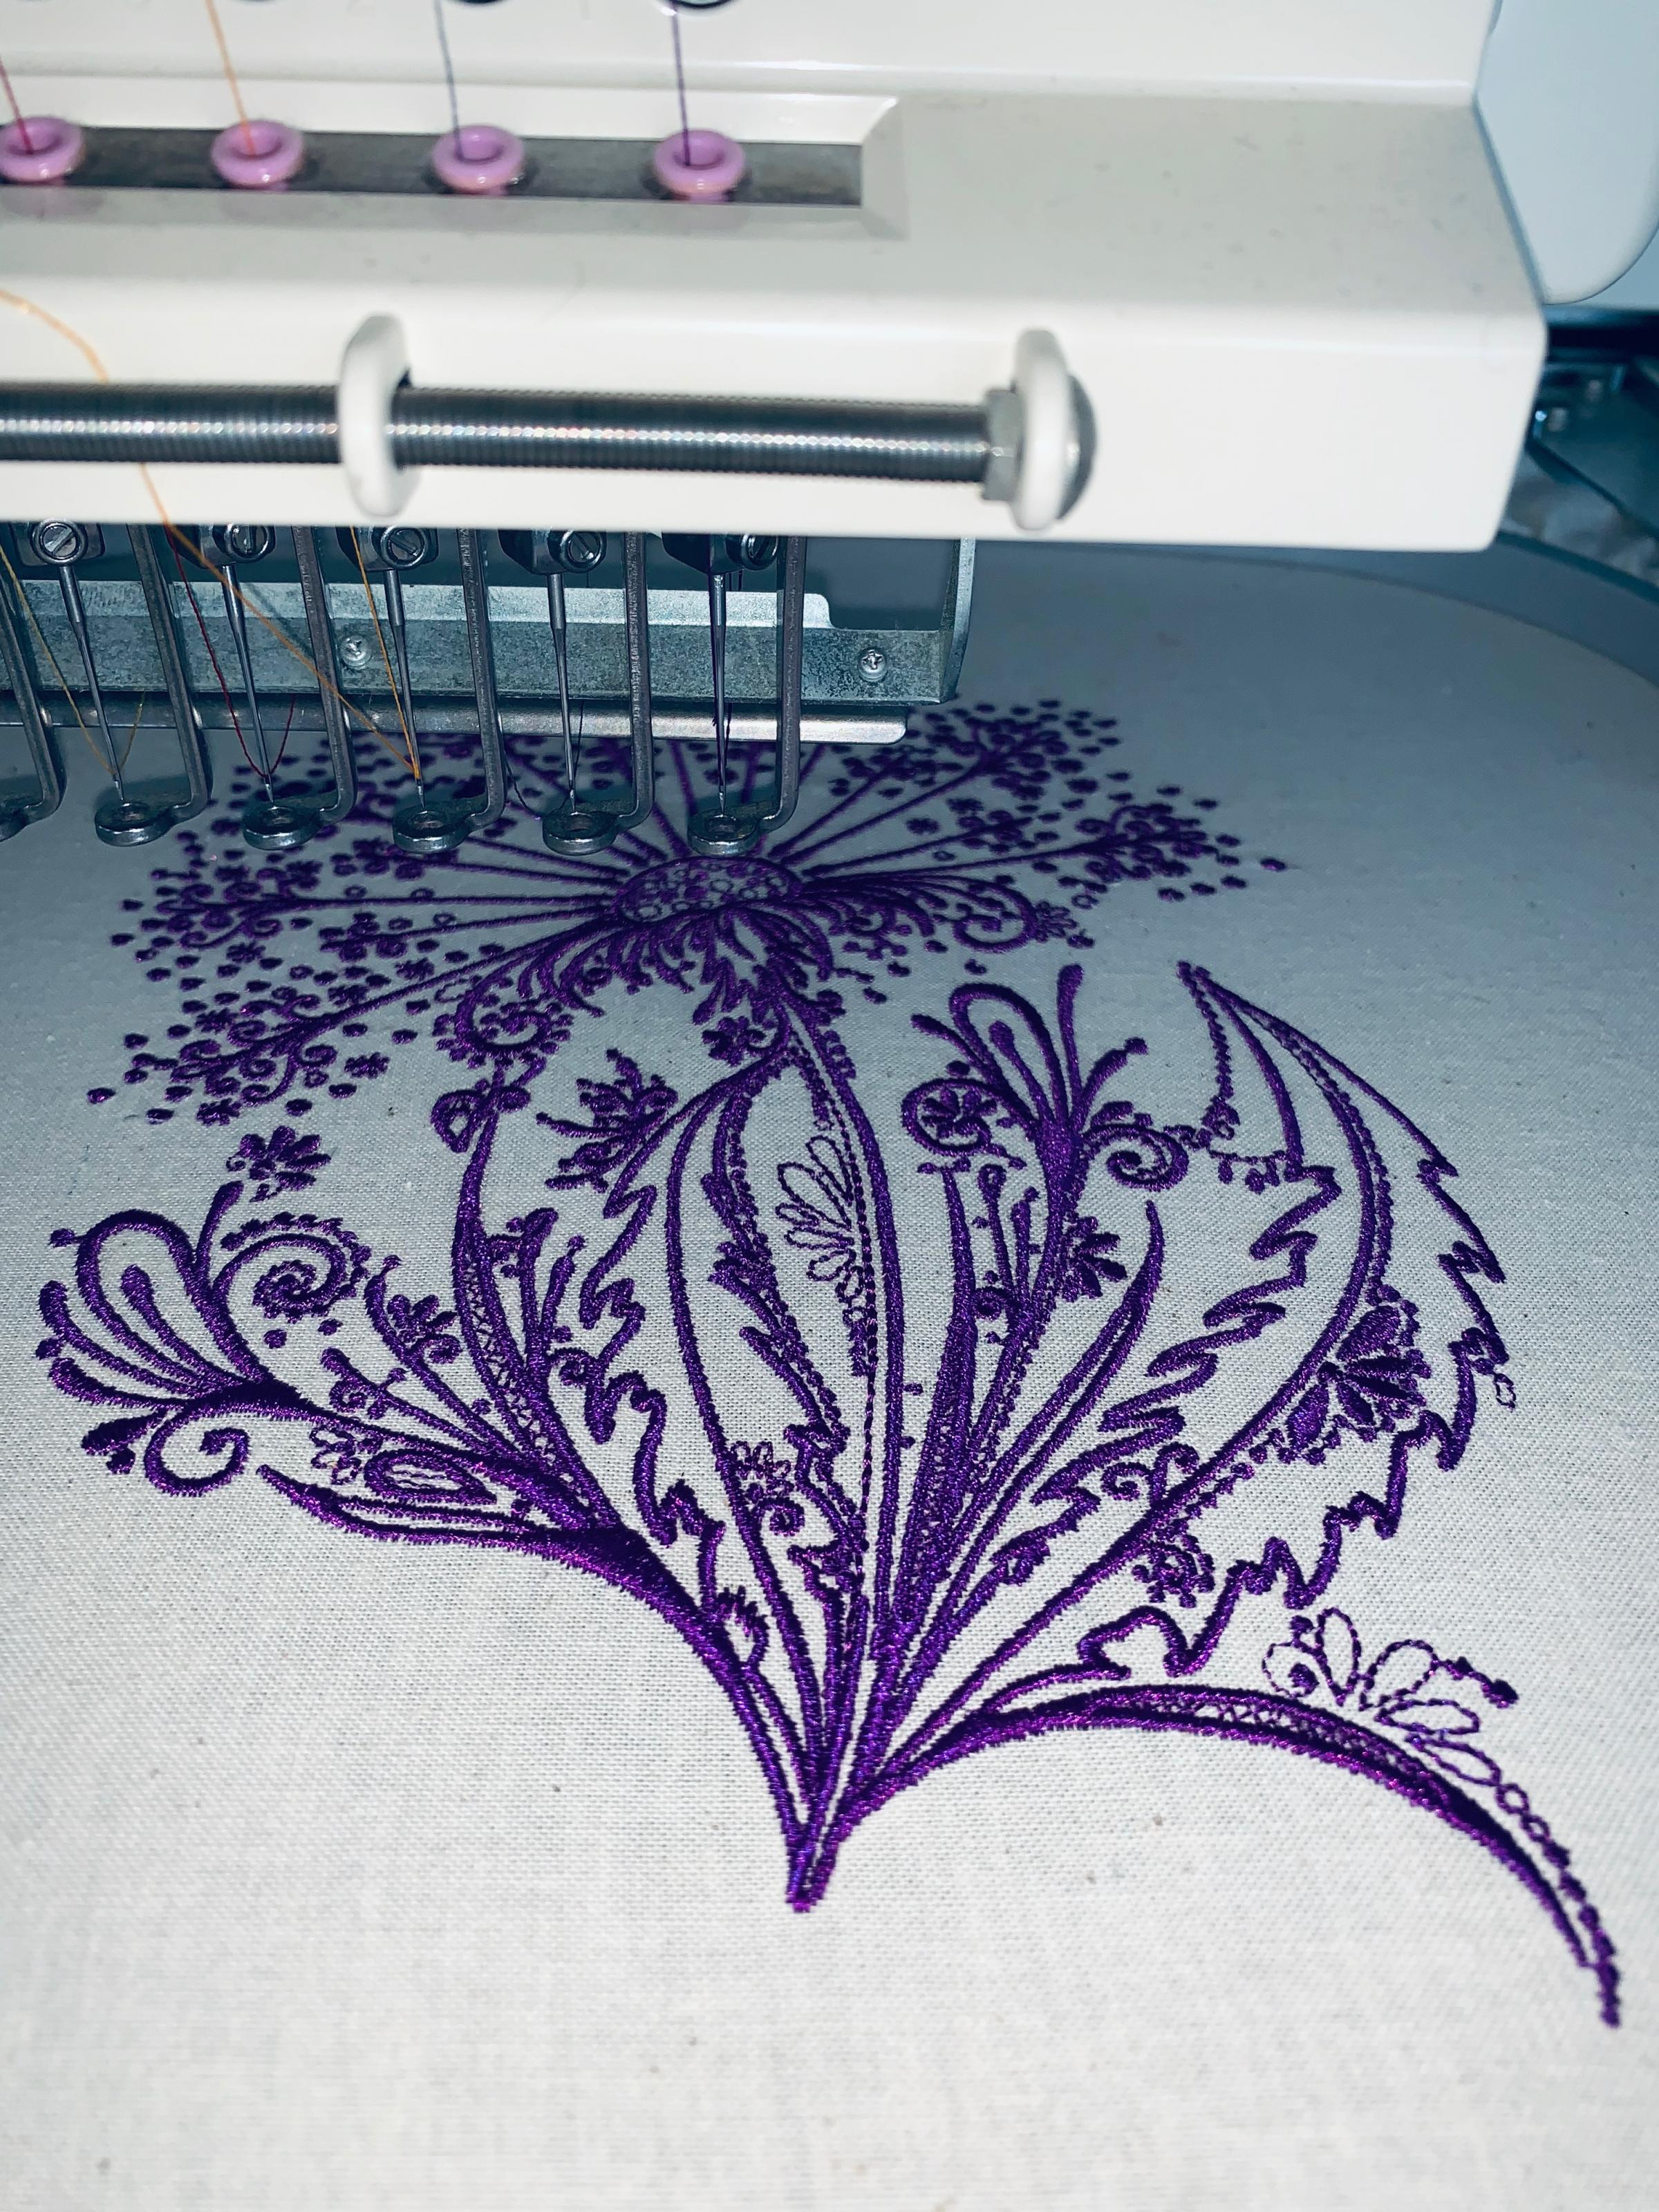 Embroidery Patterns For Sewing Machines Dandelion Embroidery Design In Sewing Machine Flowers Embroidery